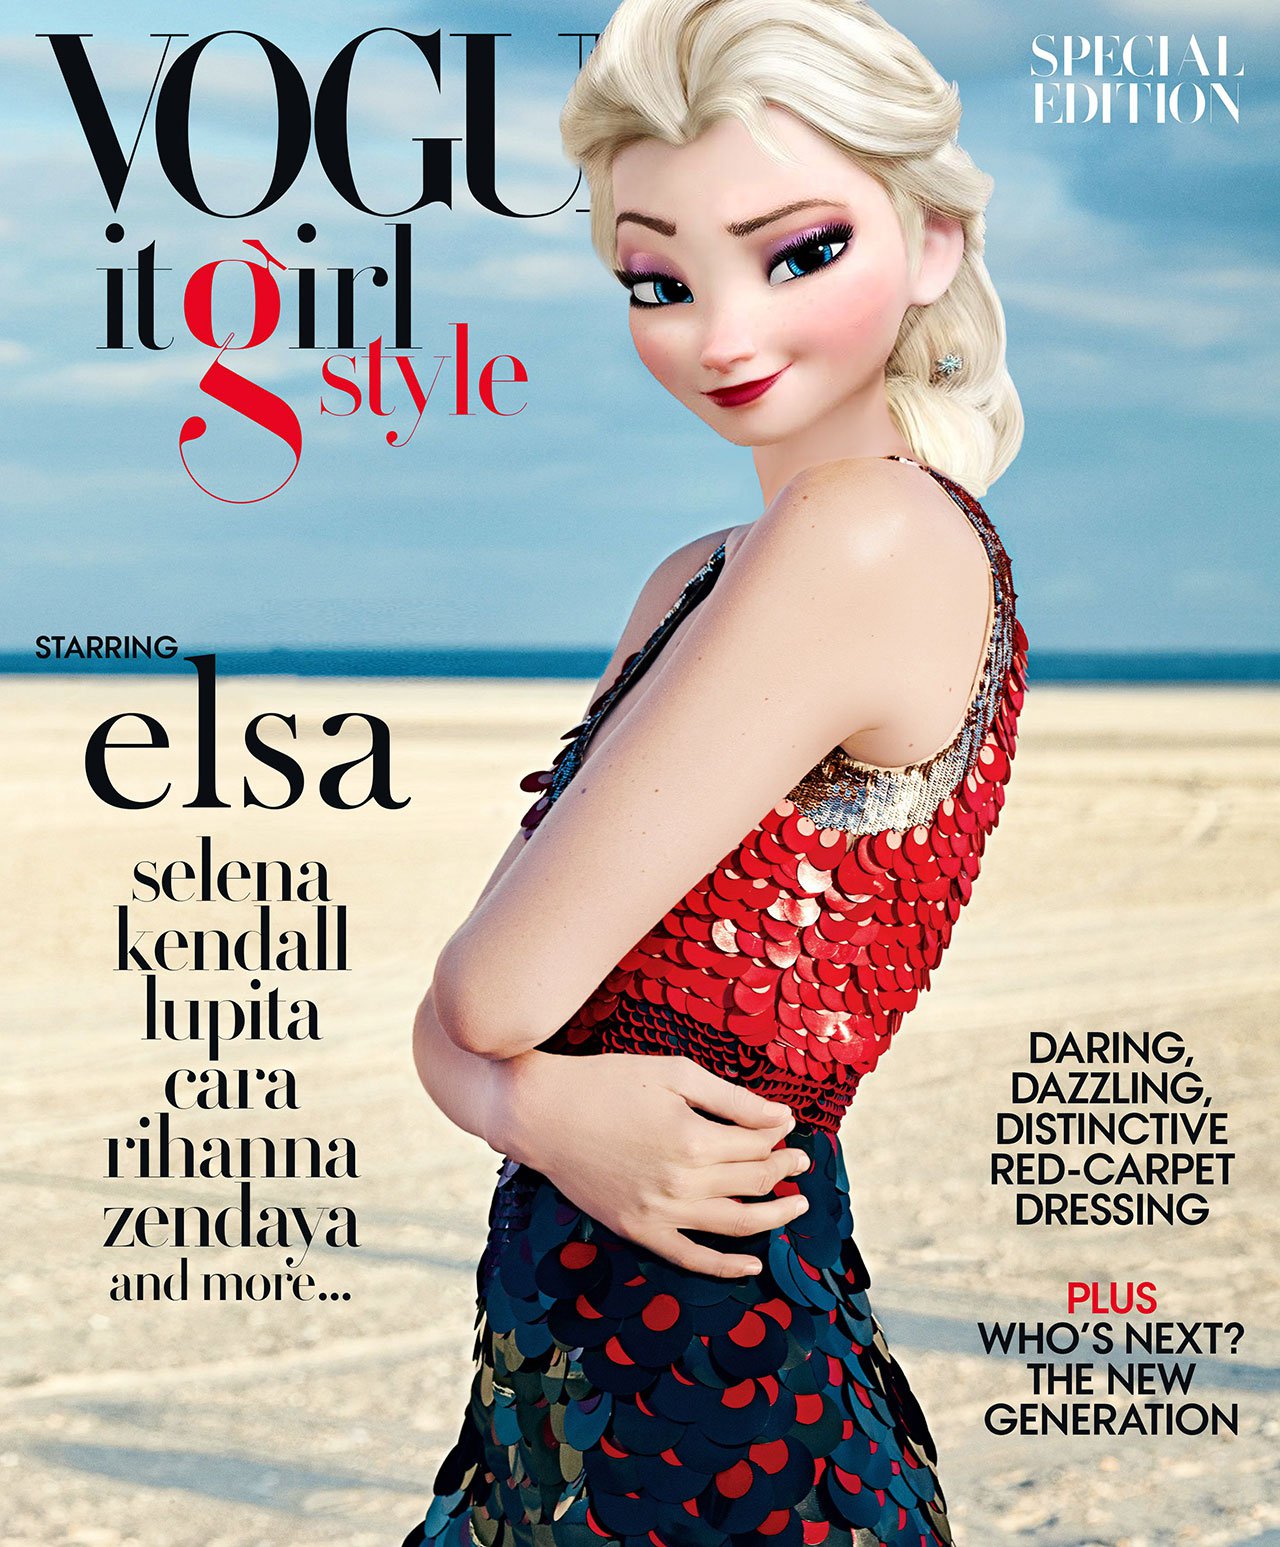 f10_animation_in_reality_by_gregory_masouras_gigi_hadid_as_elsa_vogue_it_girl_style_cover_photographed_by_gregory_harris_yatzer